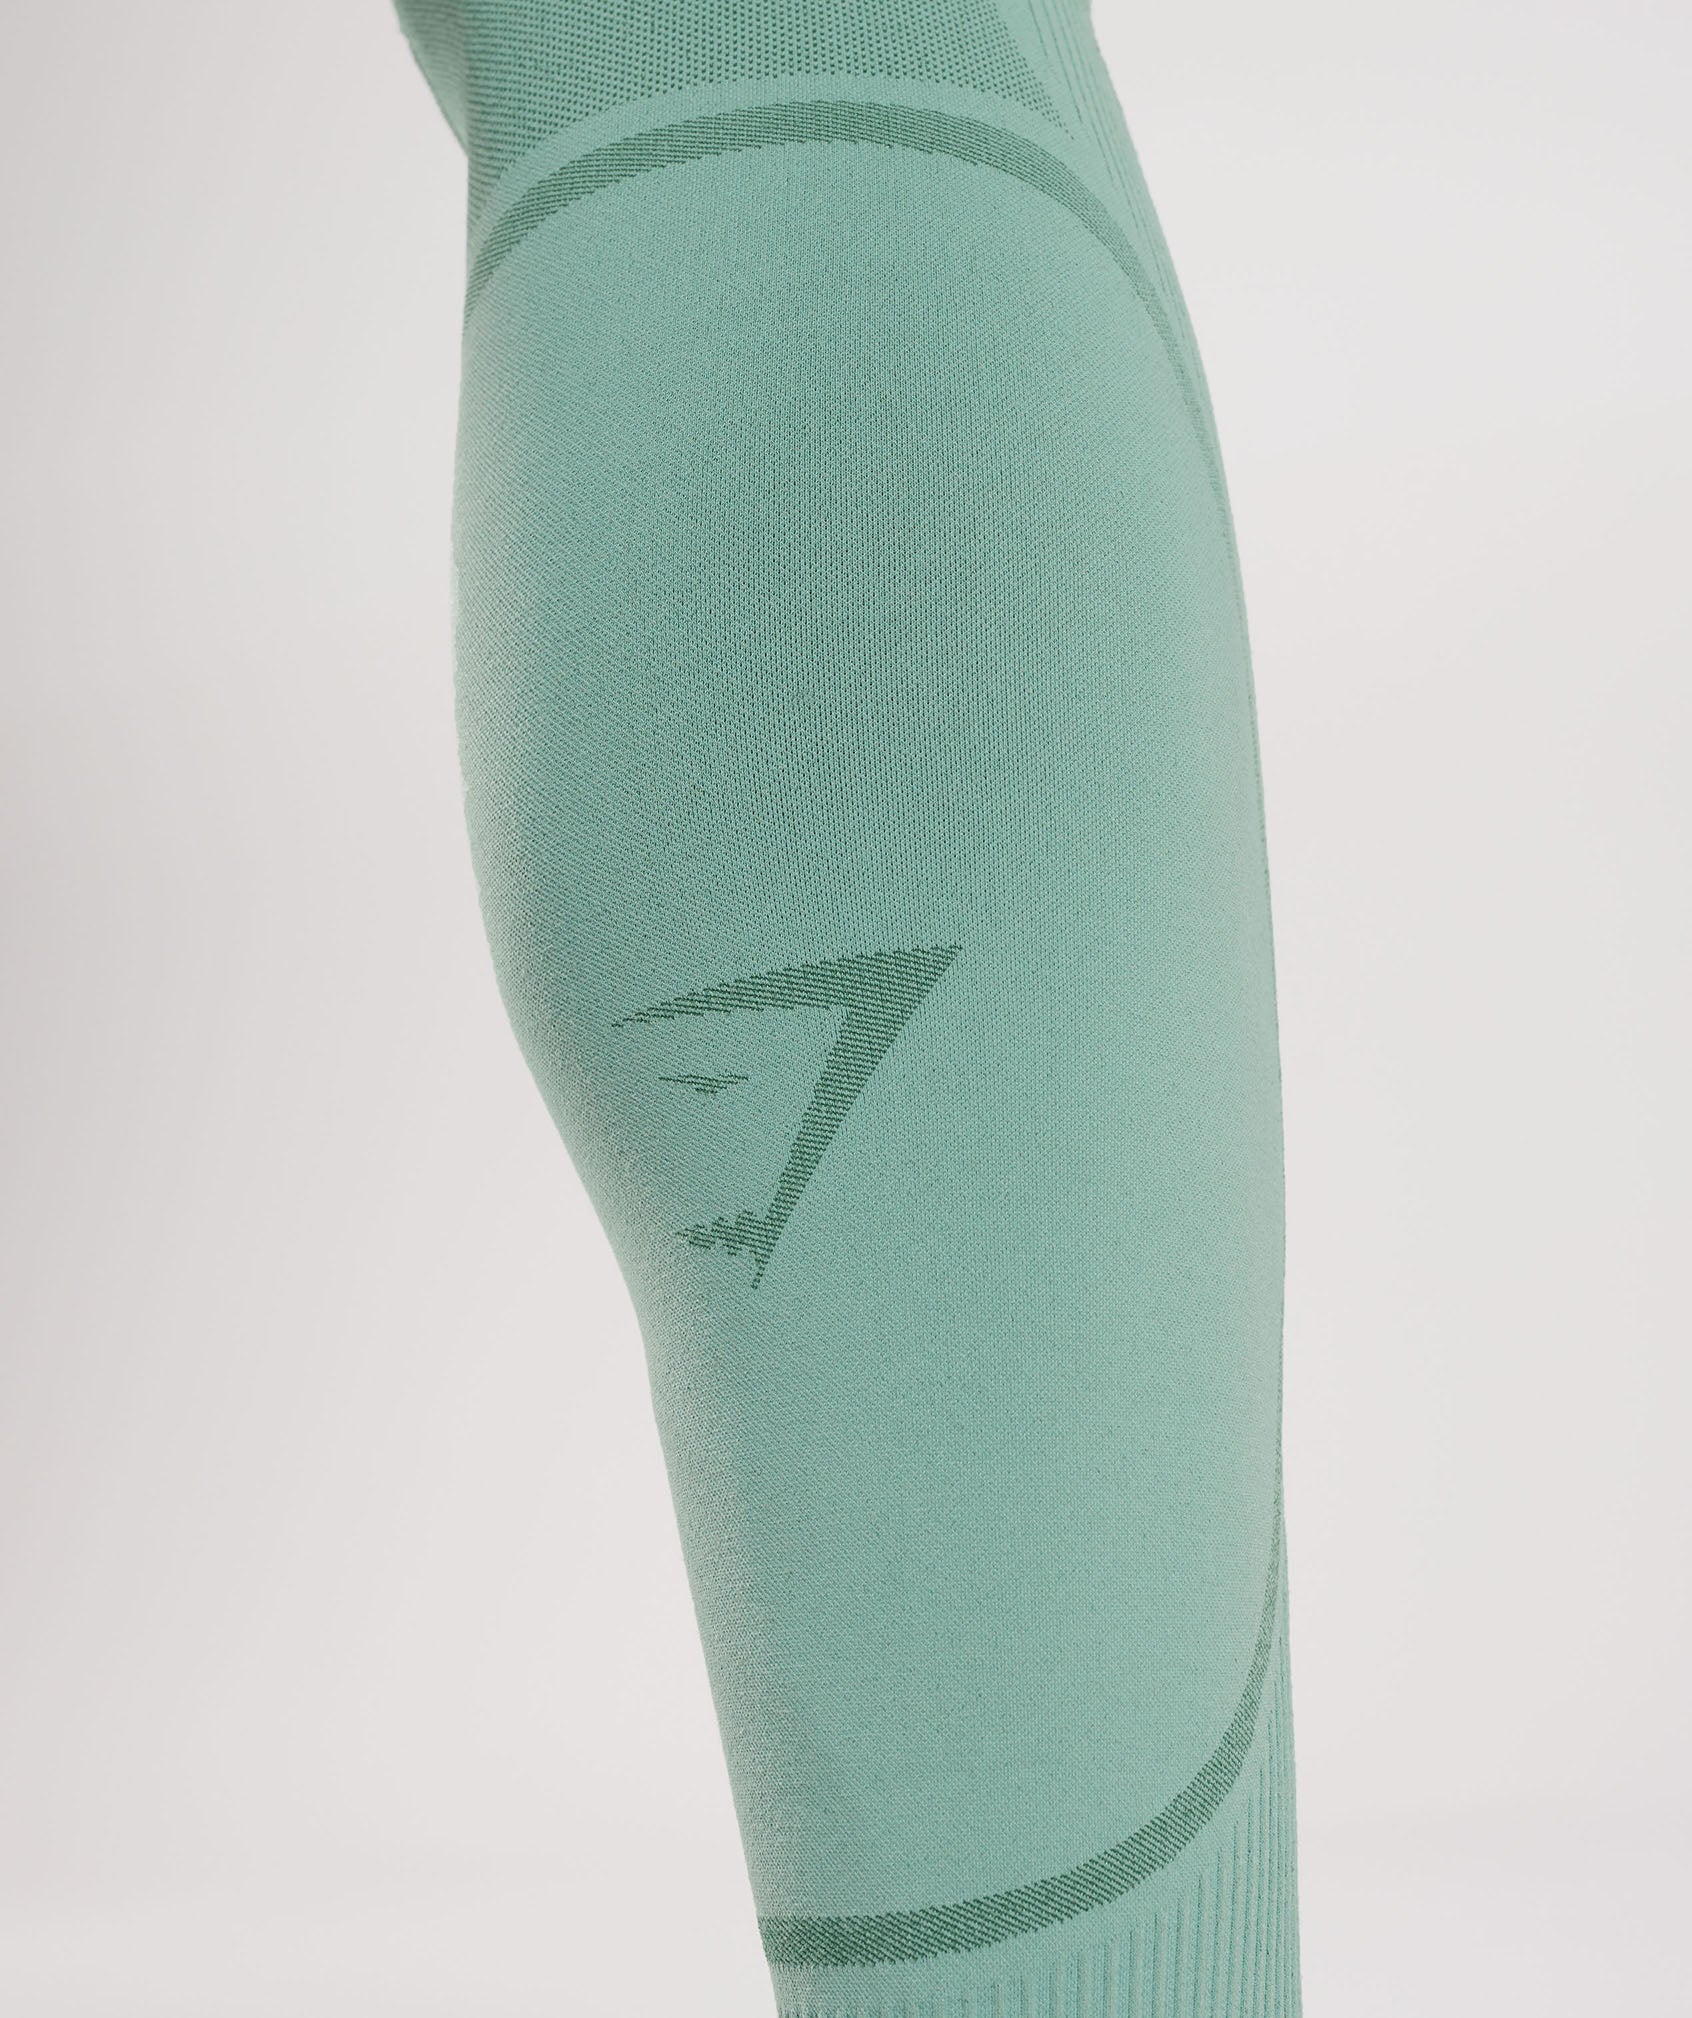 315 Seamless Tights in Ink Teal/Jewel Green - view 6